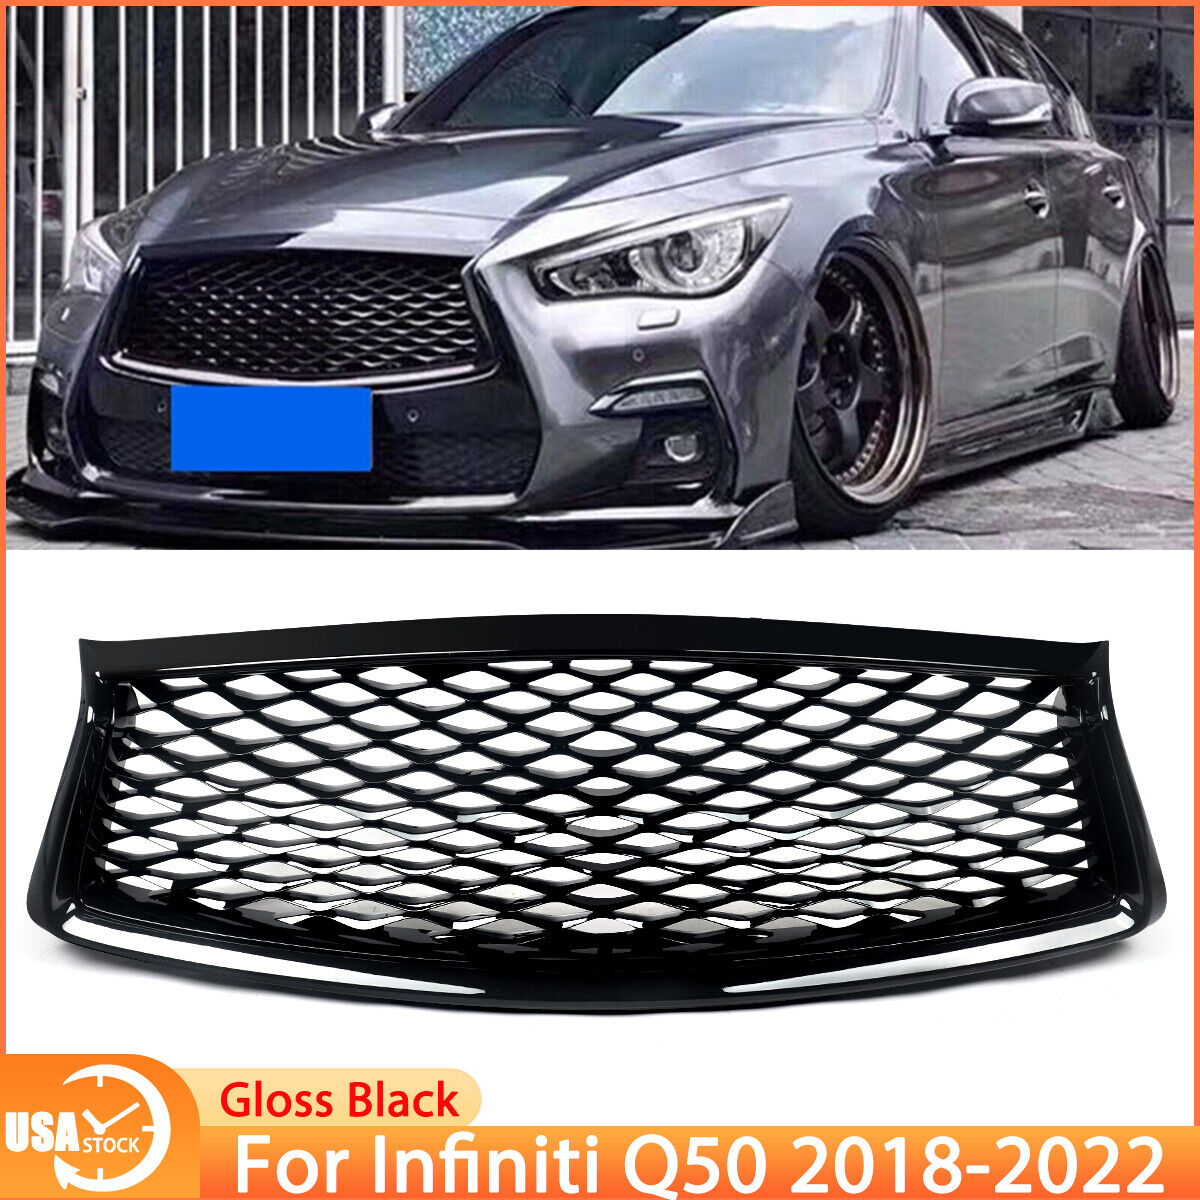 For Infiniti Q50 2018-2022 Glossy Black Front Bumper Upper Mesh Grille Grill